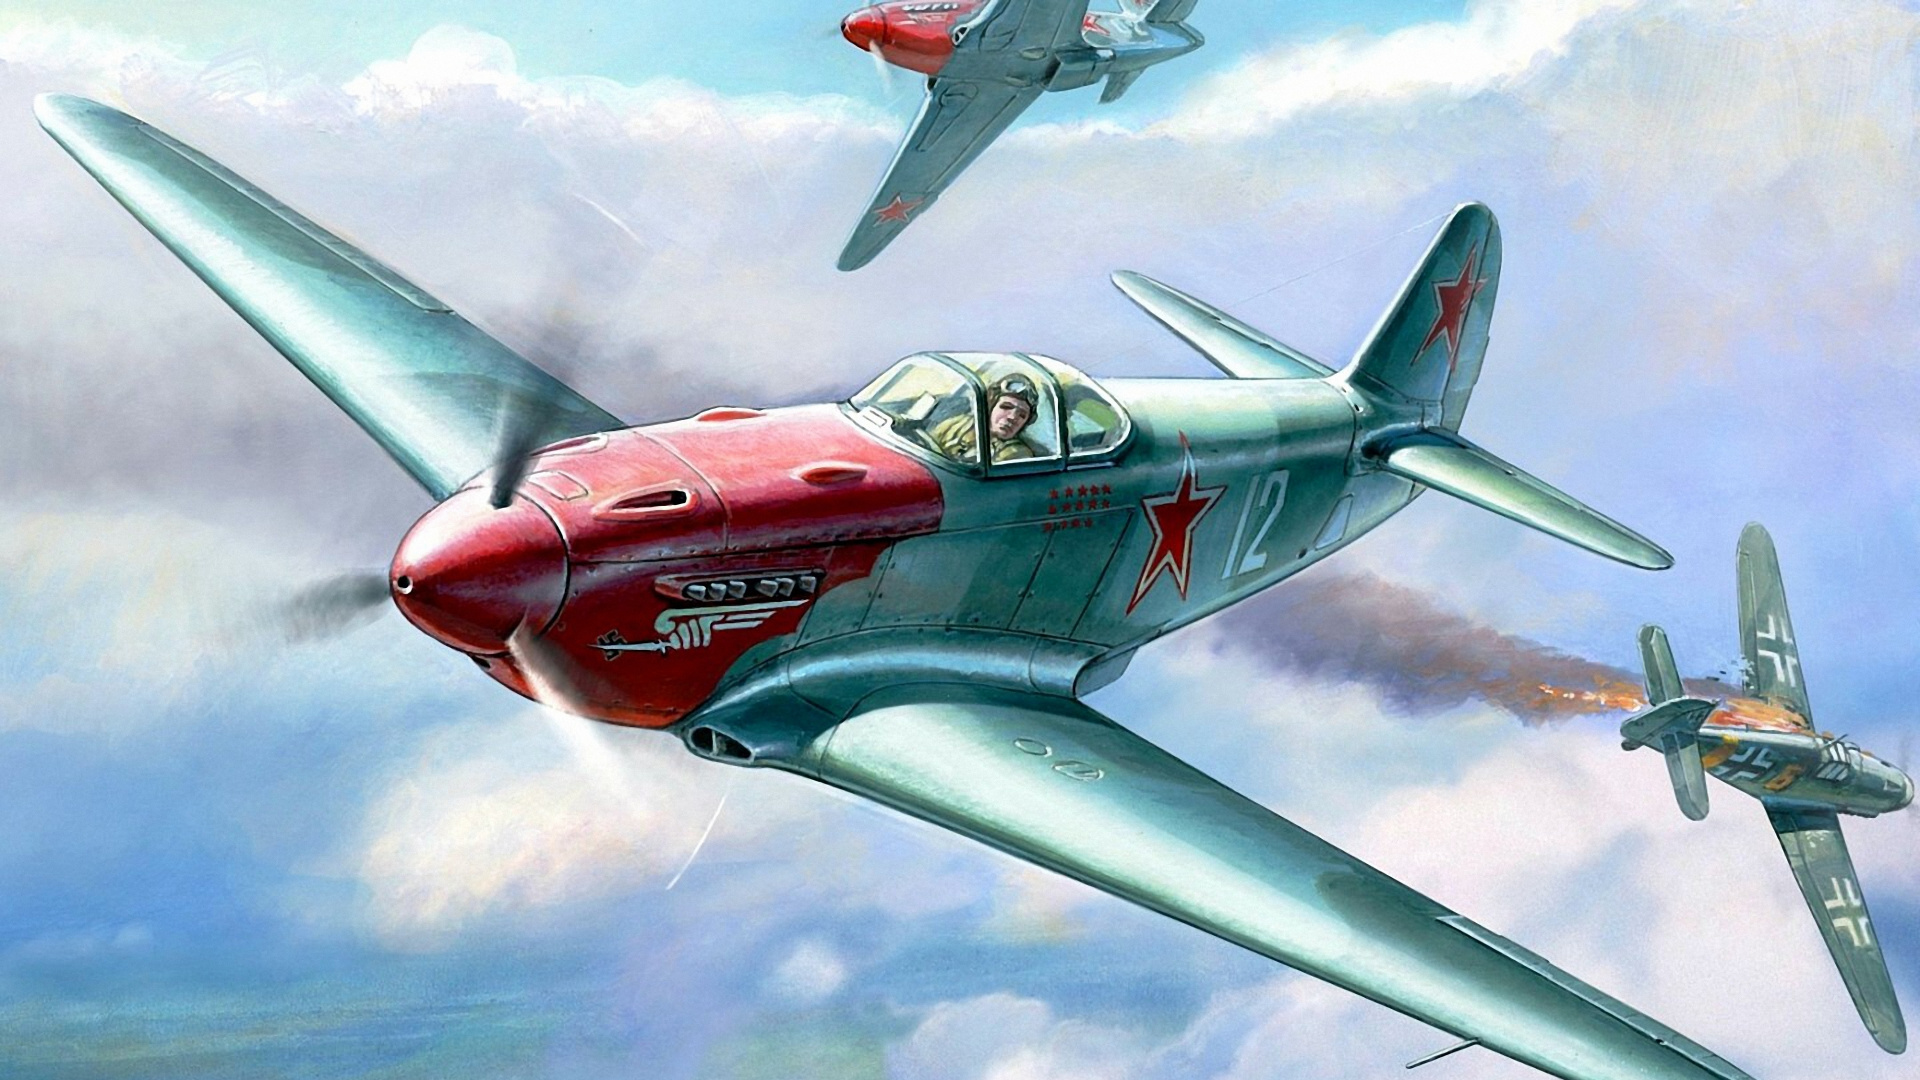 Red and Gray Jet Plane in Mid Air. Wallpaper in 1920x1080 Resolution